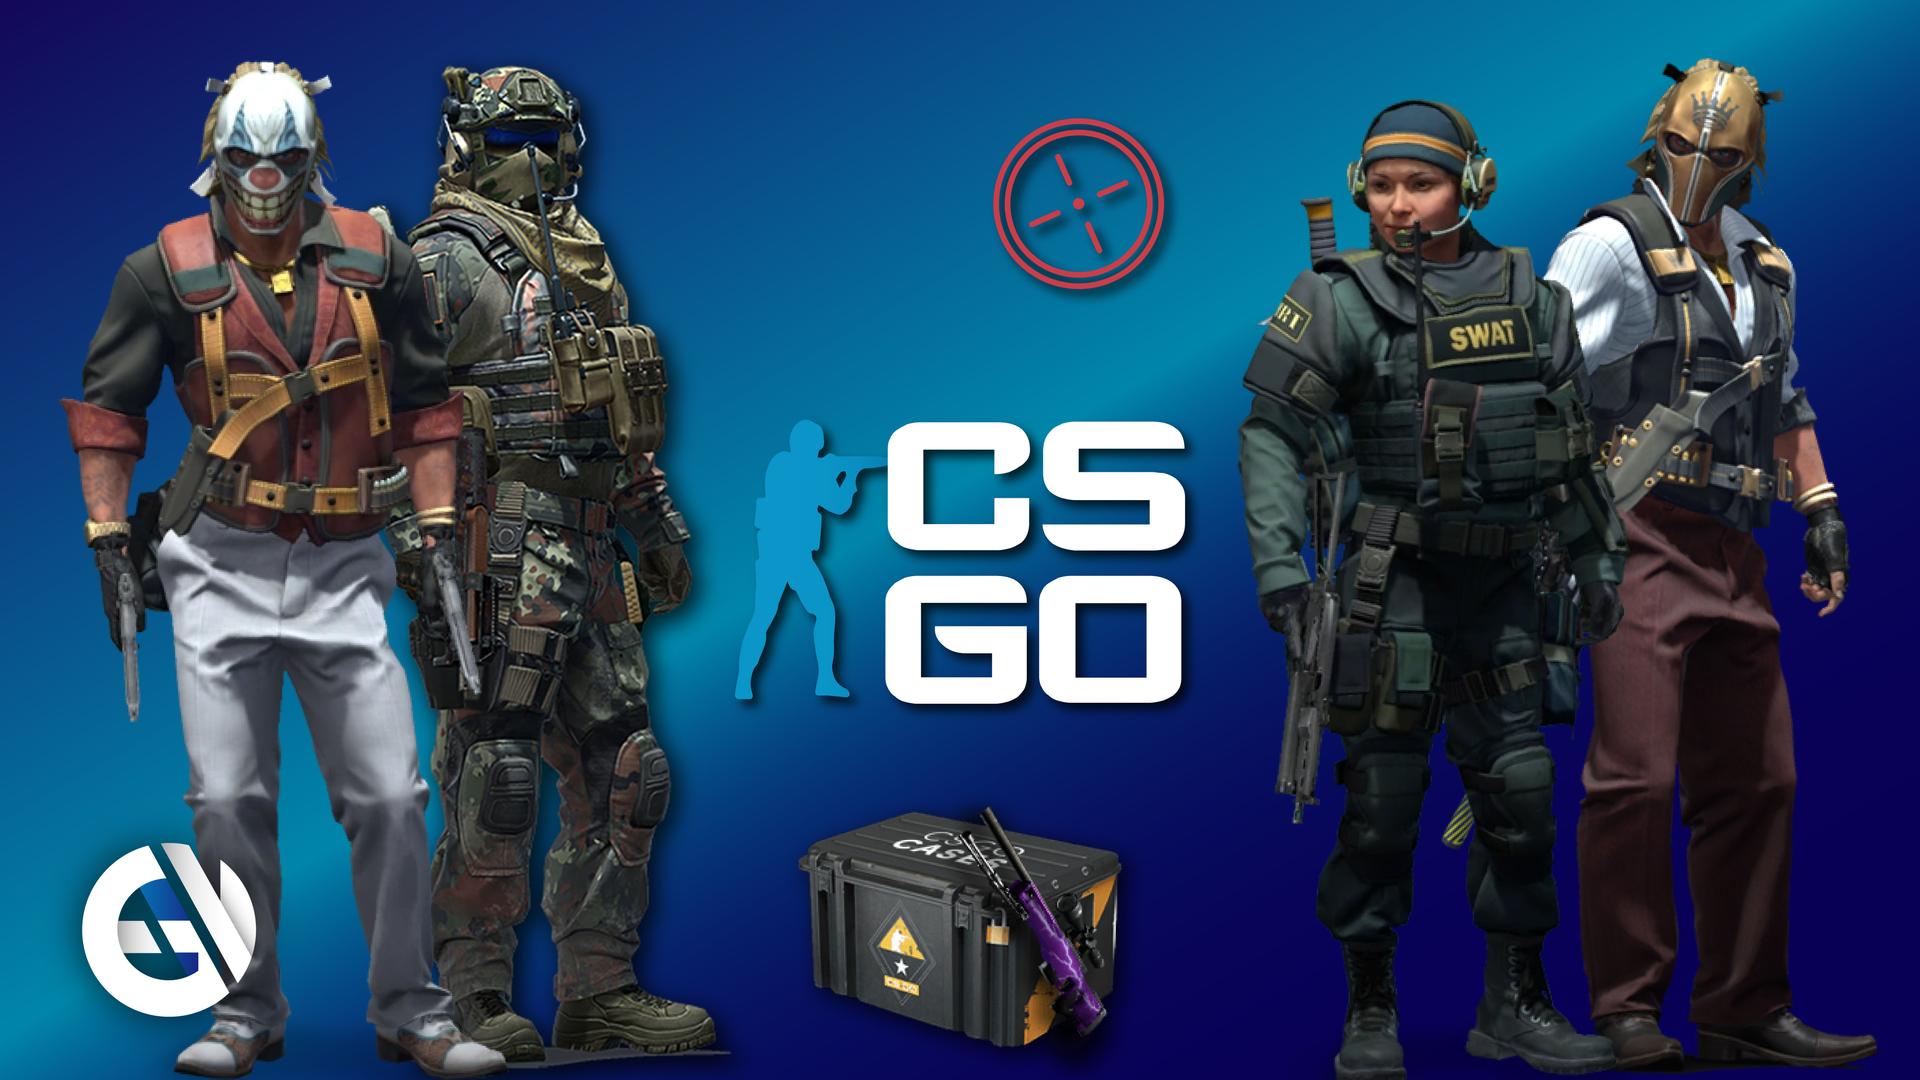 CS:GO: the shooter that has become a modern classic